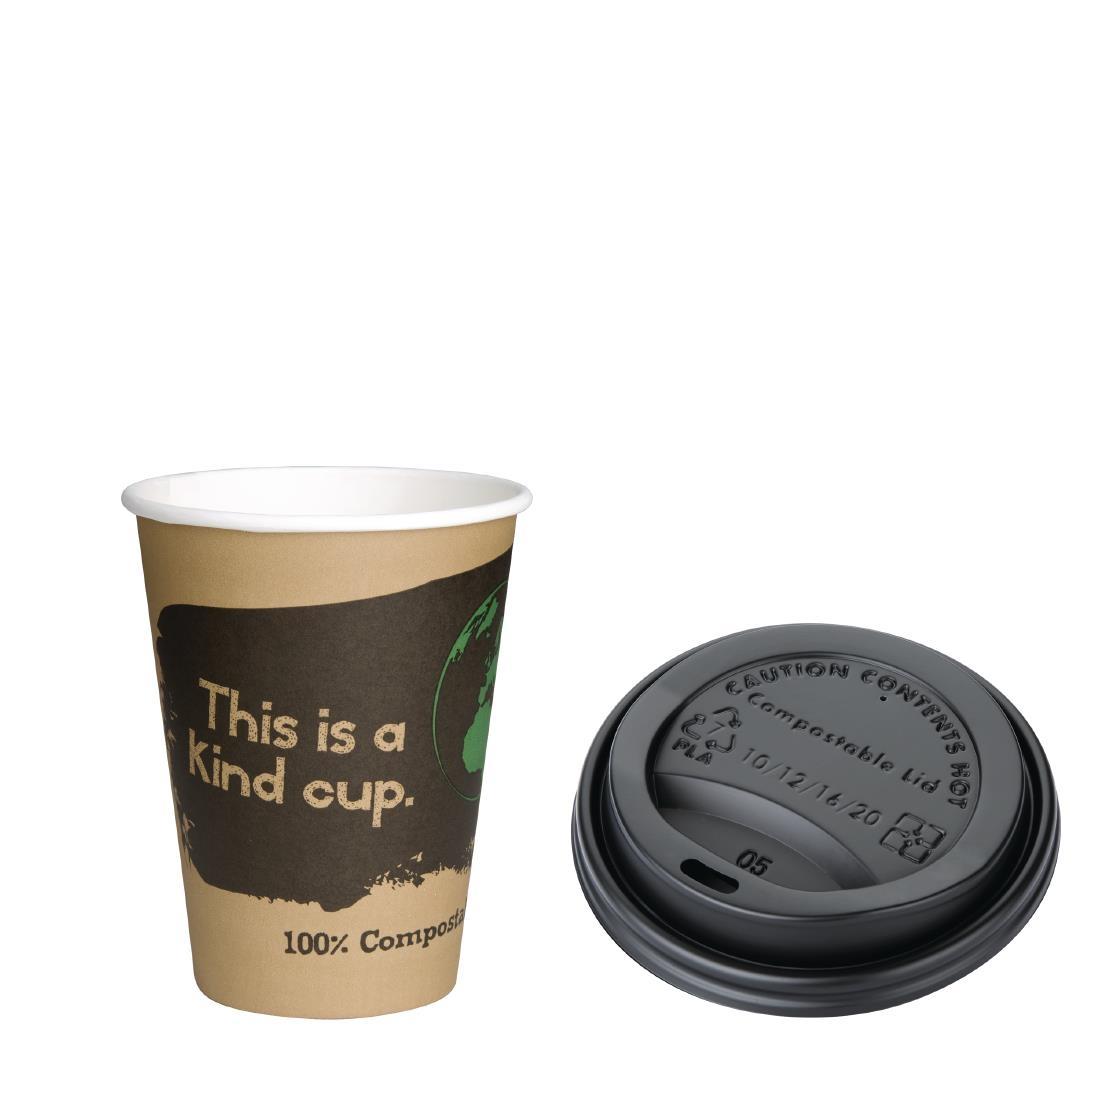 Fiesta Green 12oz Compostable Hot Cups and Lids Bundle (Pack of 1000) - SA486  - 1